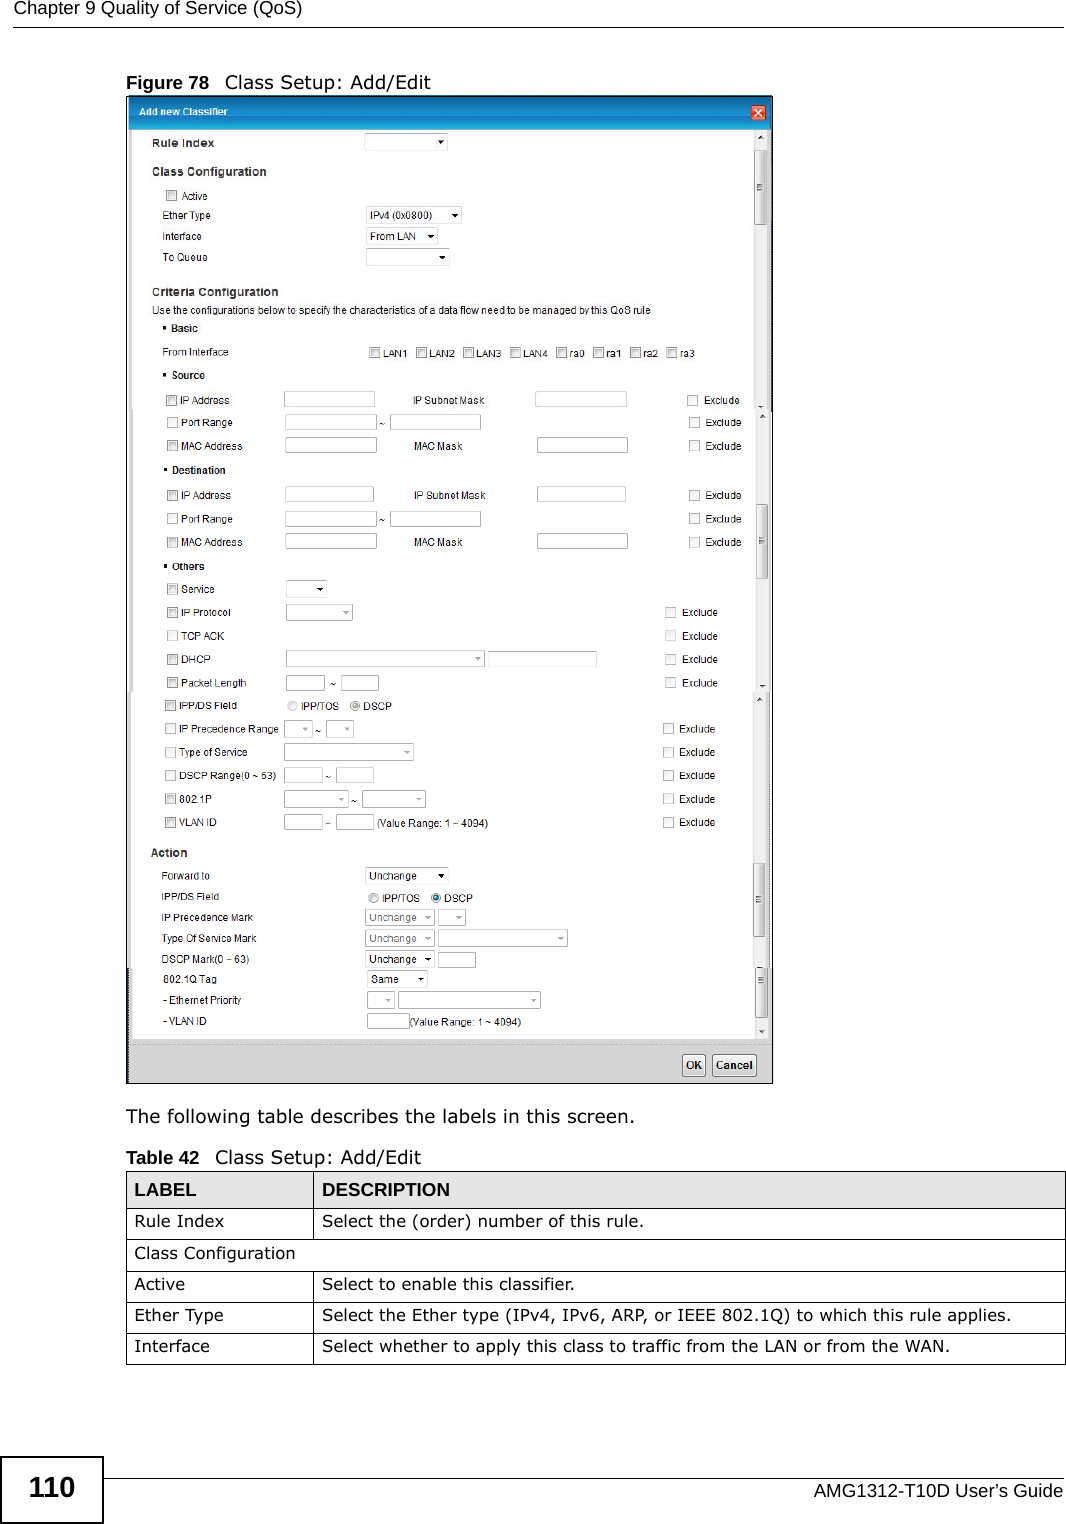 Chapter 9 Quality of Service (QoS)AMG1312-T10D User’s Guide110Figure 78   Class Setup: Add/EditThe following table describes the labels in this screen.  Table 42   Class Setup: Add/EditLABEL DESCRIPTIONRule Index Select the (order) number of this rule.Class ConfigurationActive Select to enable this classifier.Ether Type Select the Ether type (IPv4, IPv6, ARP, or IEEE 802.1Q) to which this rule applies.Interface Select whether to apply this class to traffic from the LAN or from the WAN.